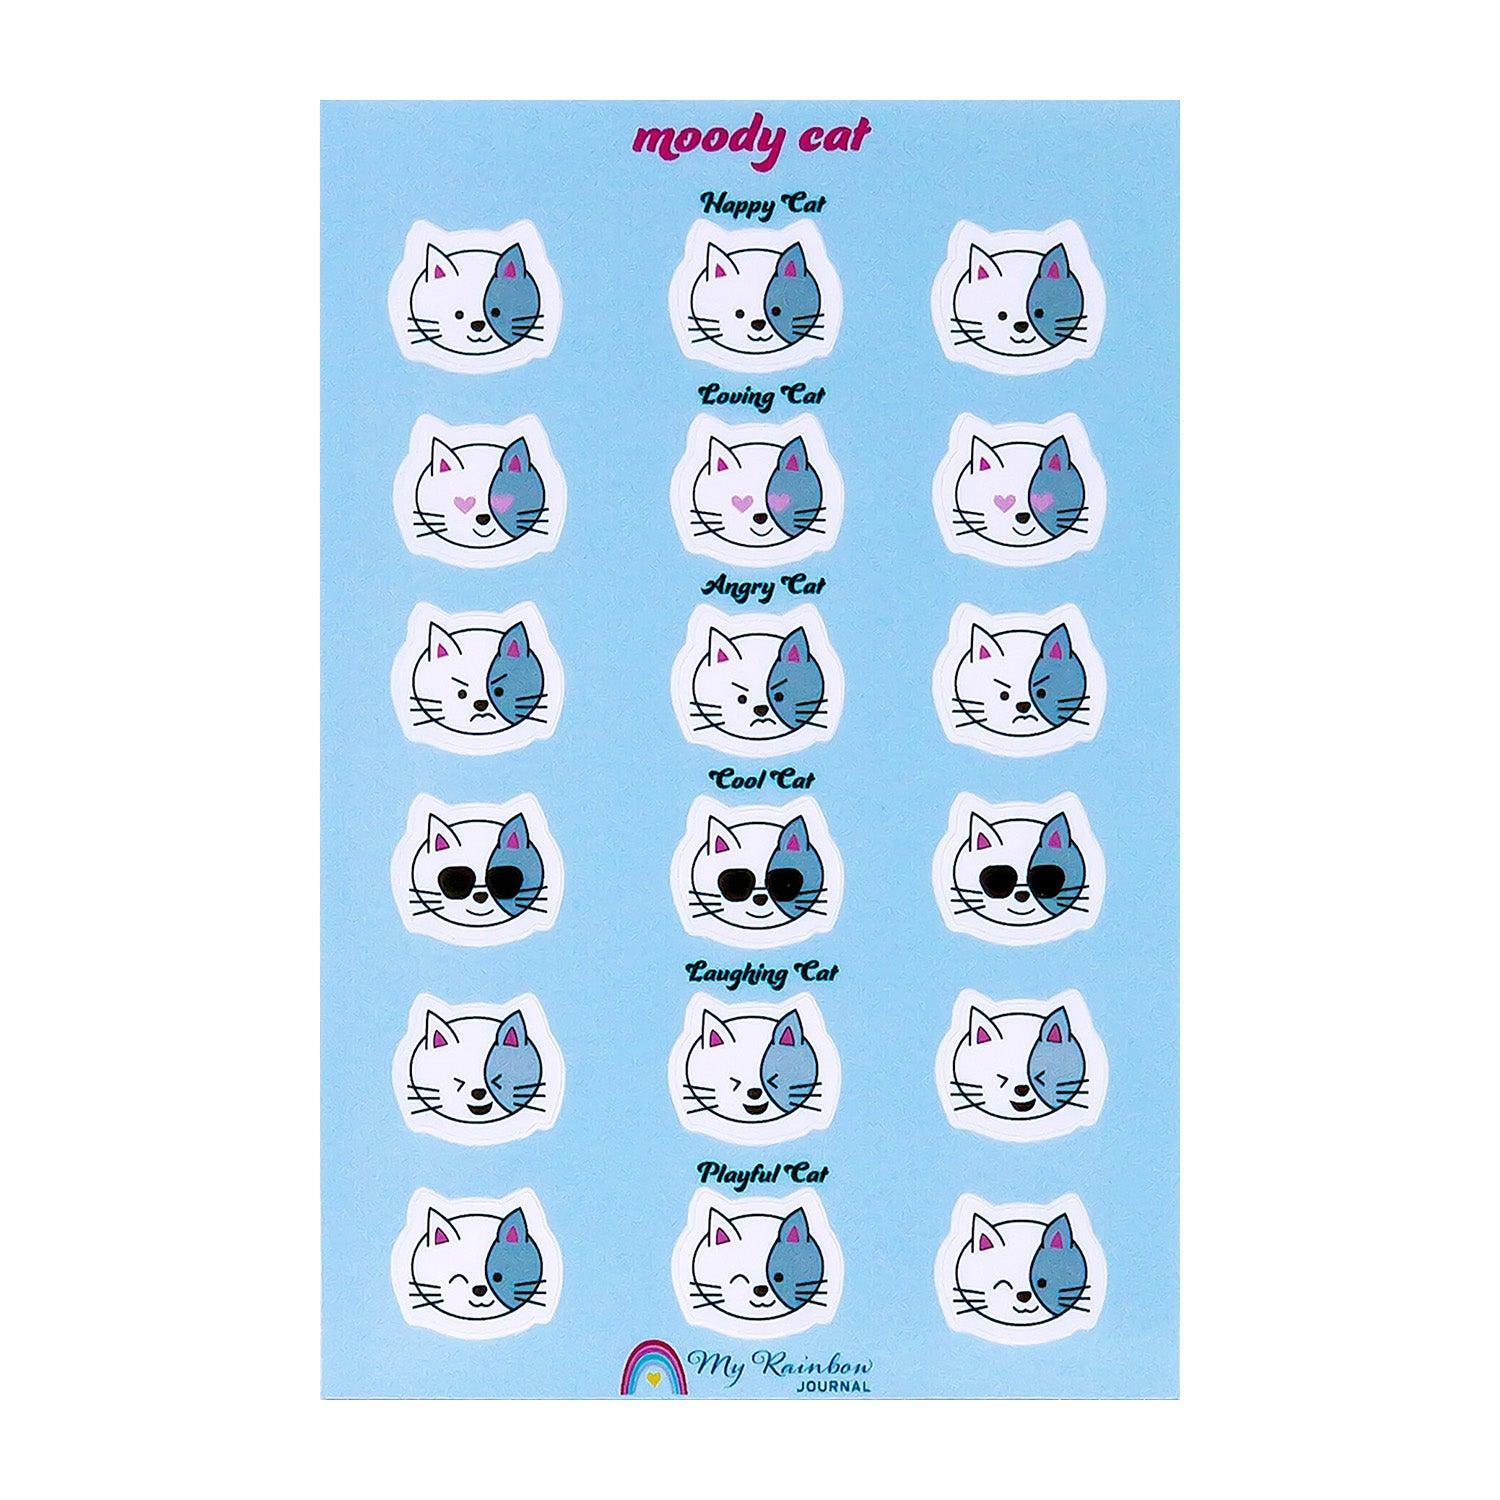 Moody Cat Sticker Sheet features a cat that is very moody and expresses different emotions in a funny and adorable way.